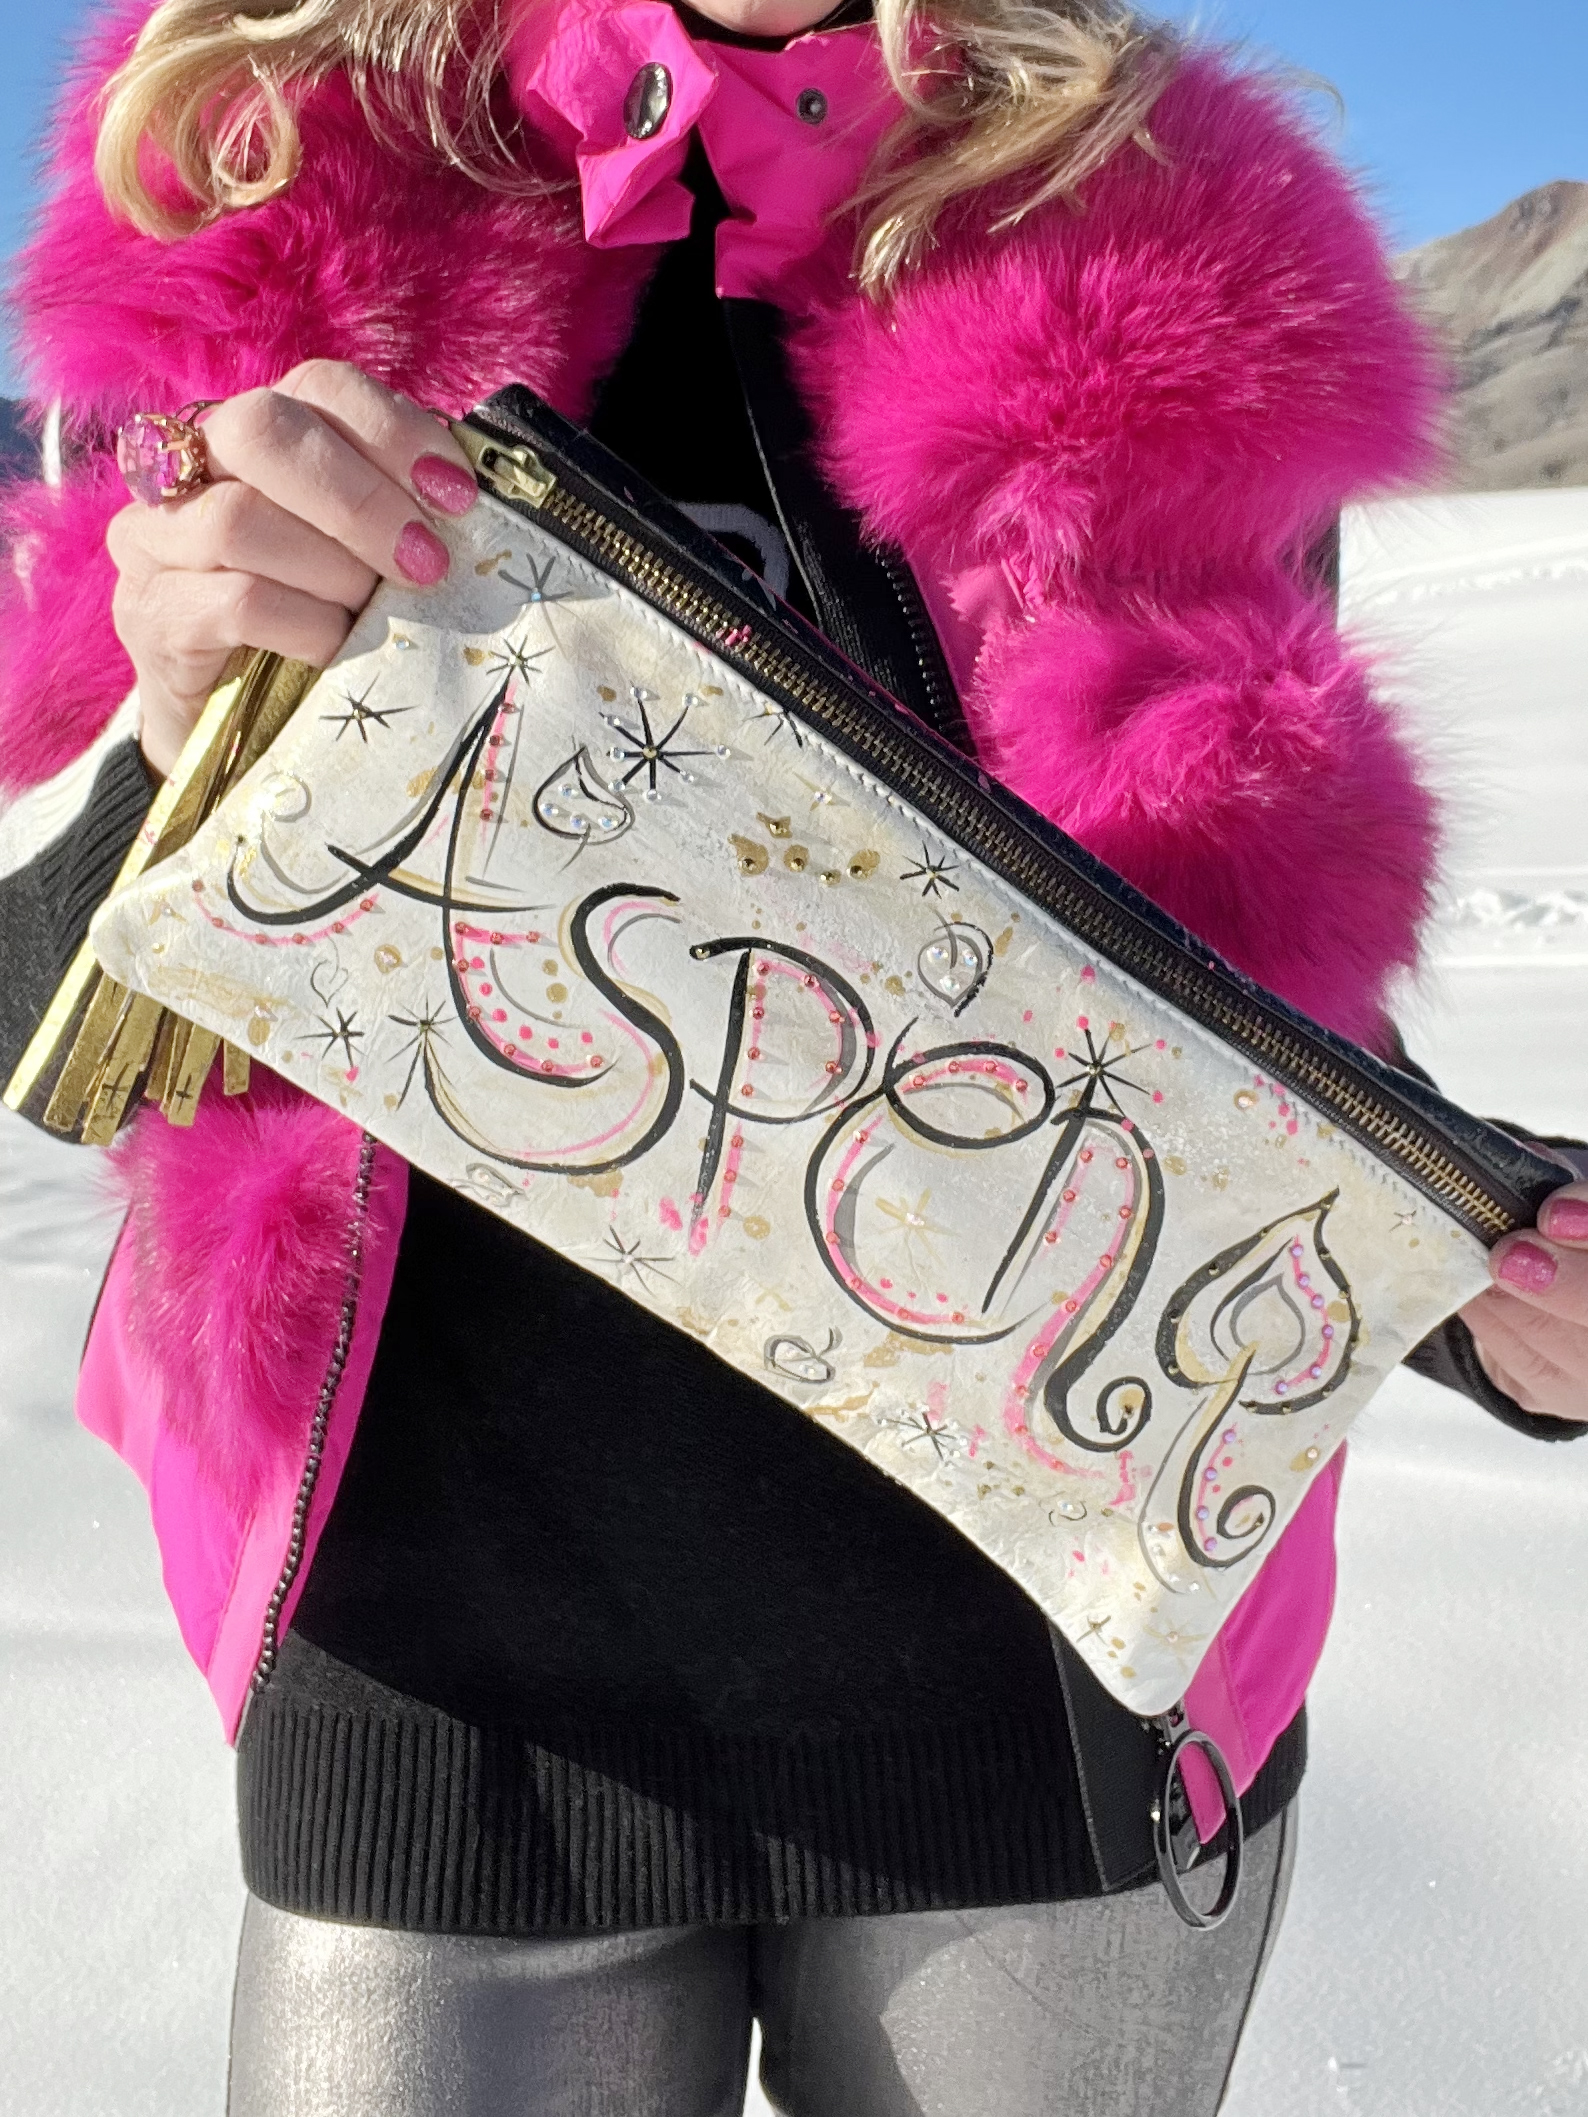 Aspen hand painted clutch by Mer Rose Atelier